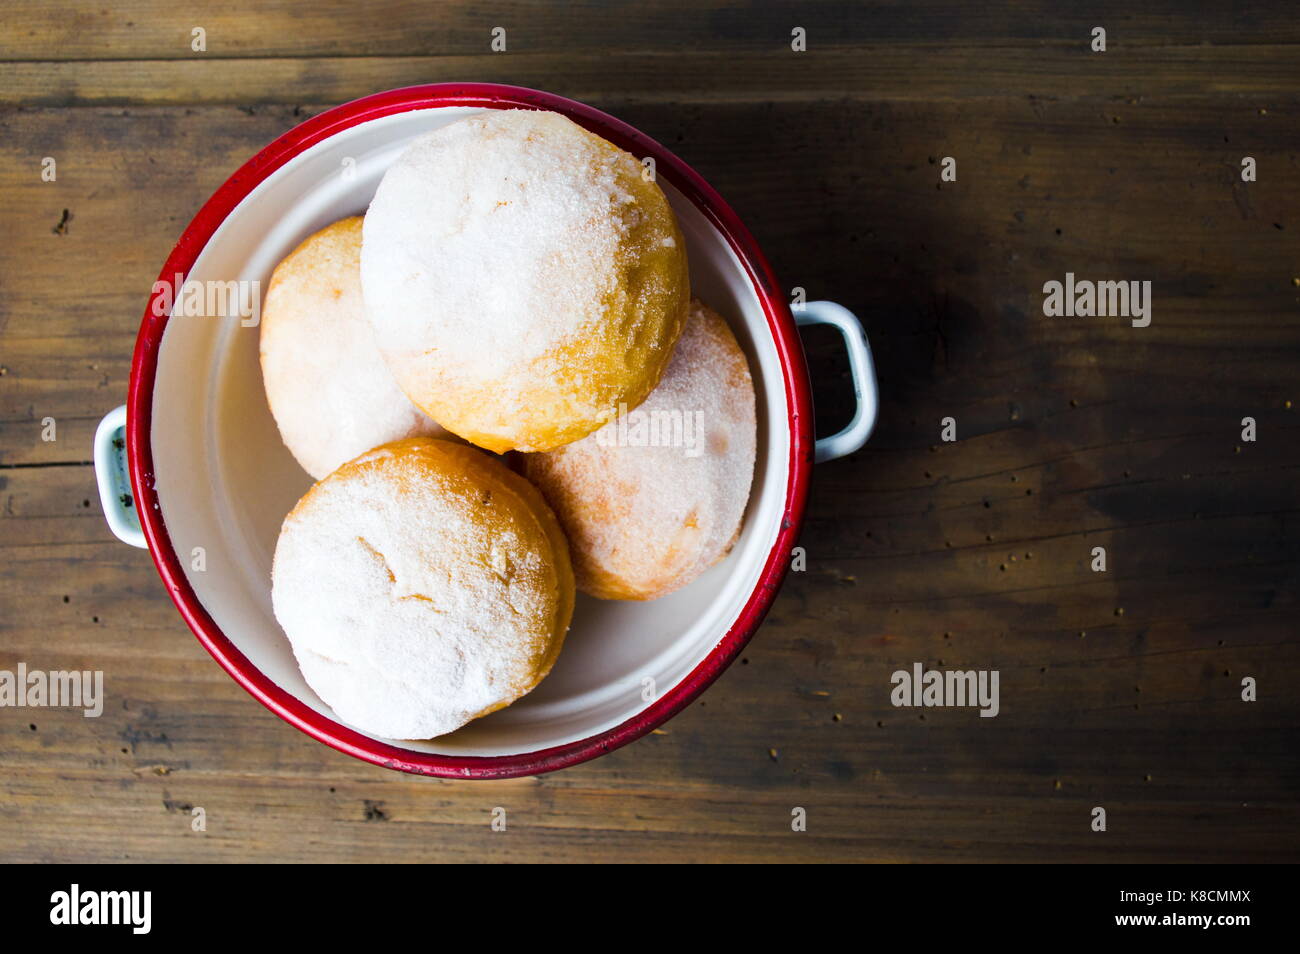 Homemade doughnuts covered with sugar powder on a plate Stock Photo